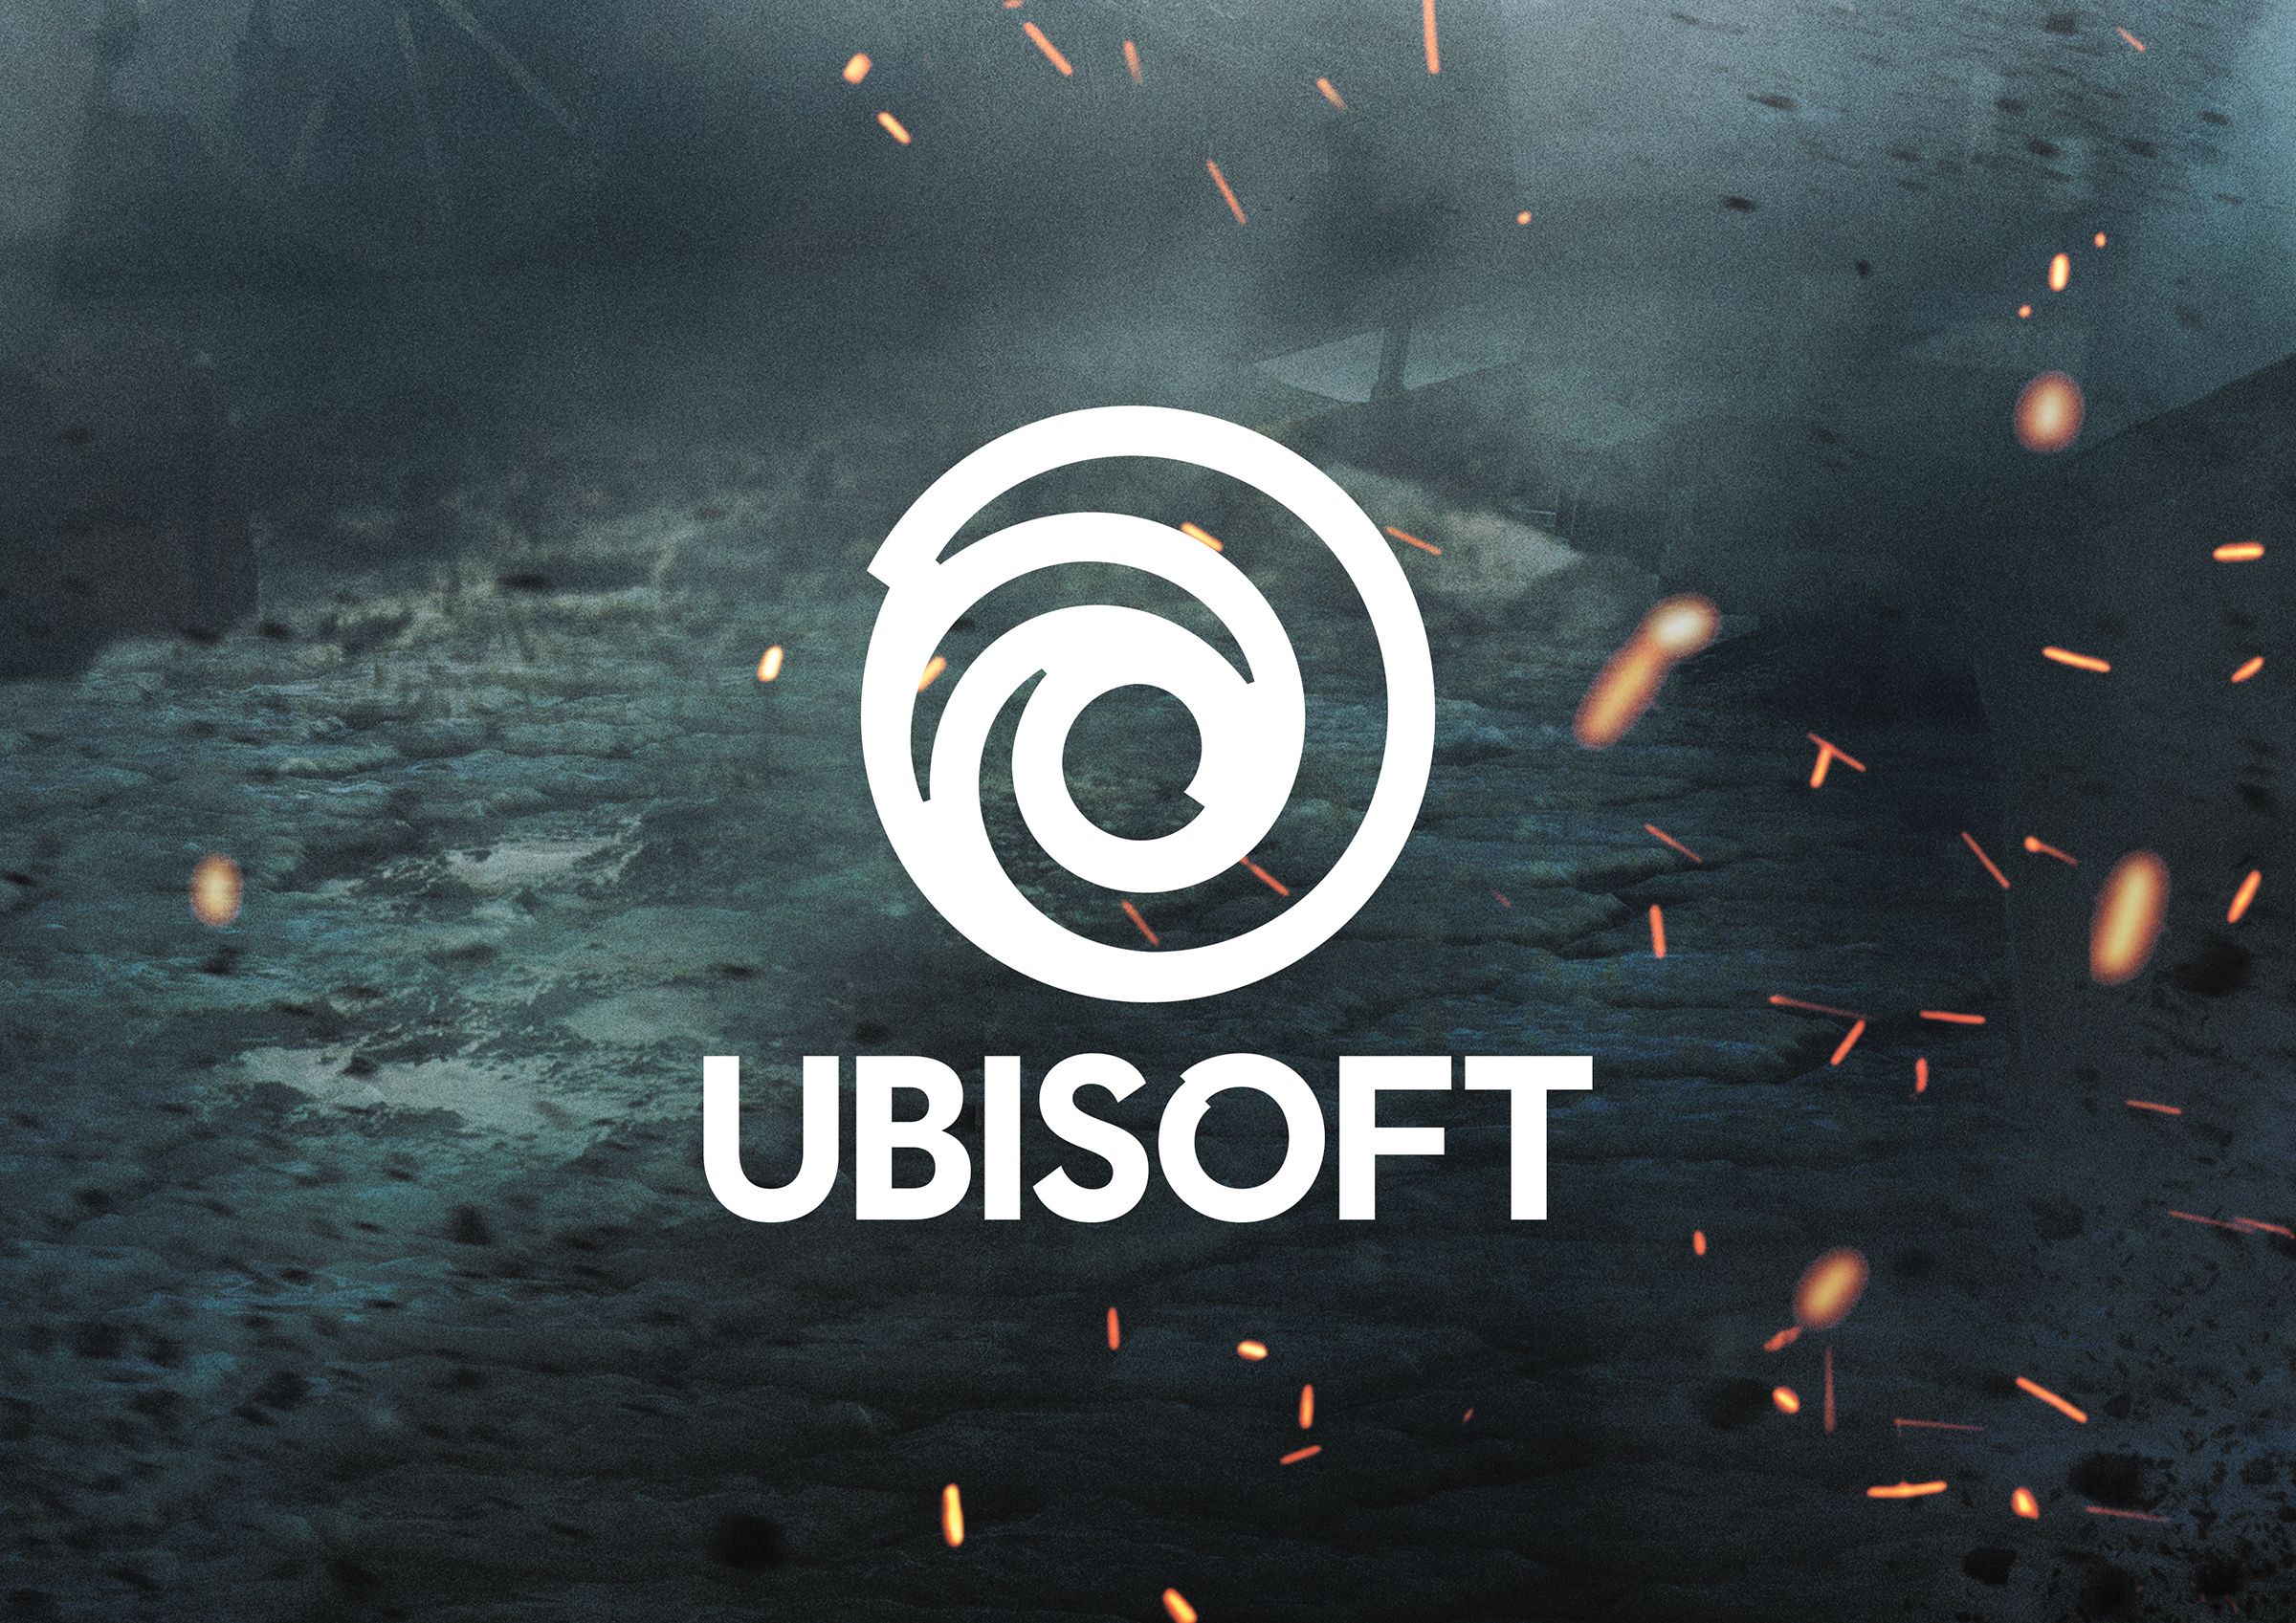 Keep playing, keep paying: Ubisoft seeks games with “longterm engagement” |  Ars Technica